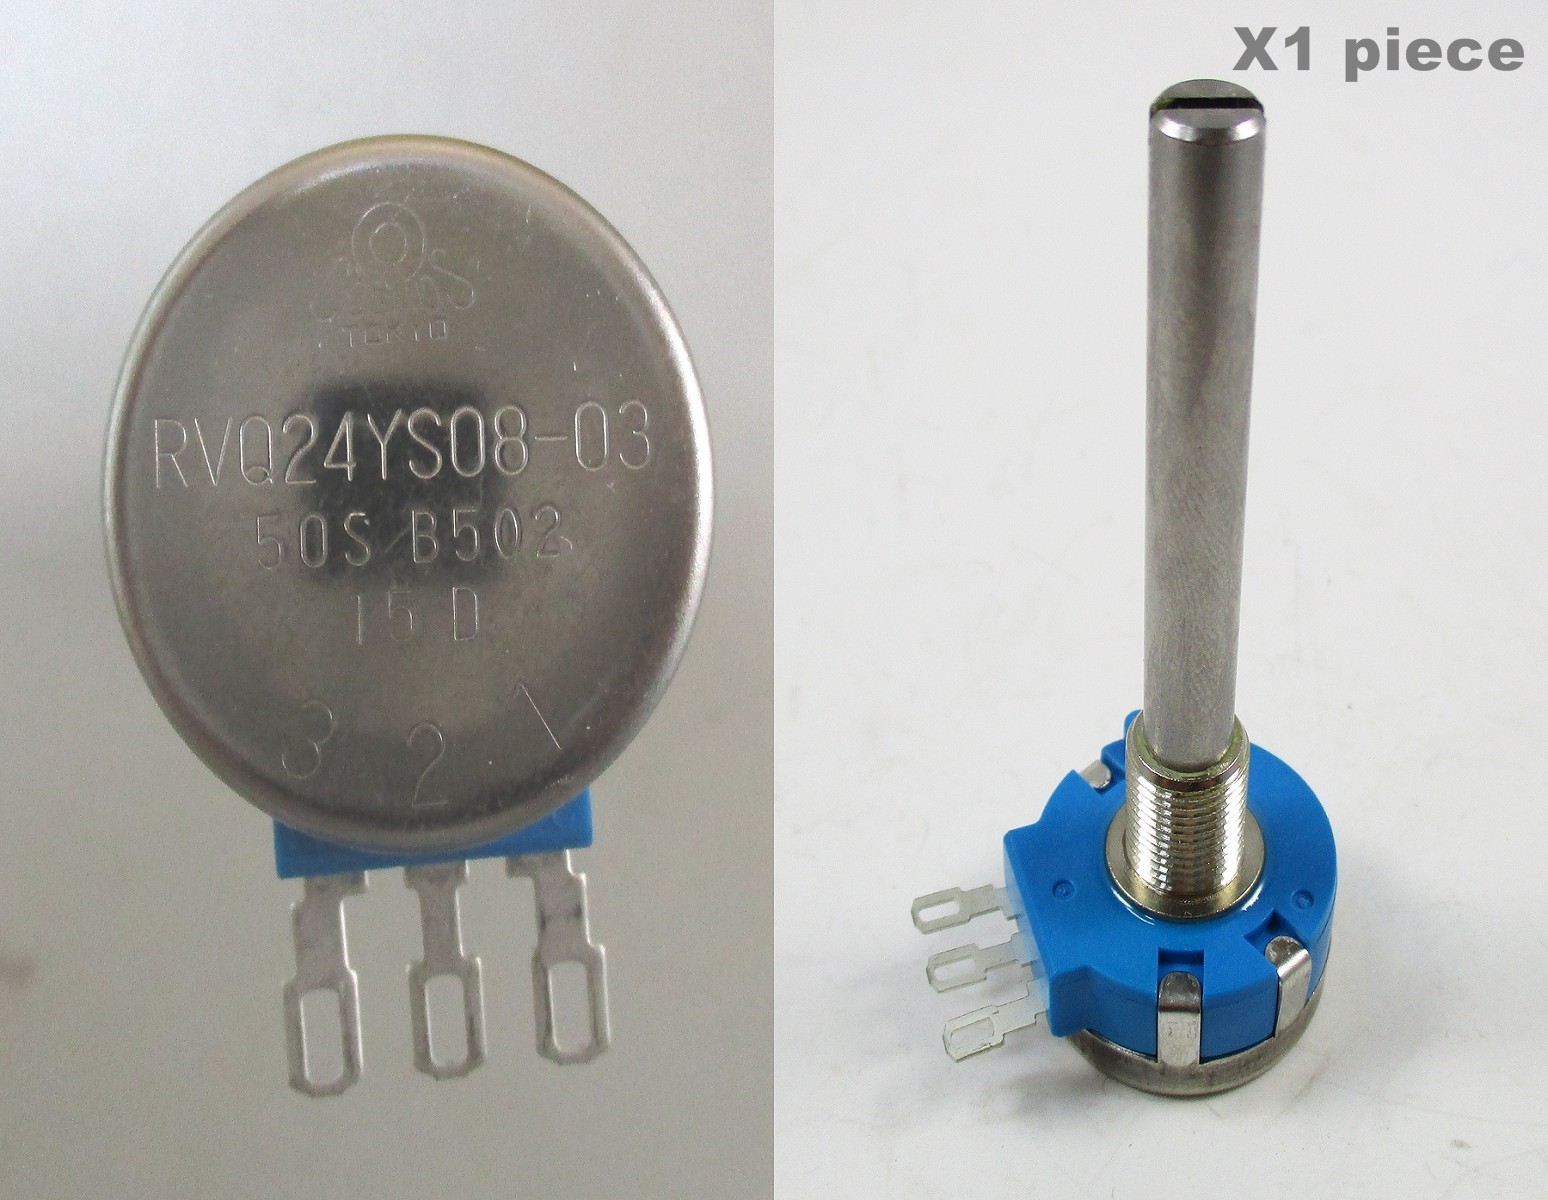 MSP X1 TOCOS 5KVR-RVQ24YS08-03 50S MobilityScooterParts throttle potentiometer